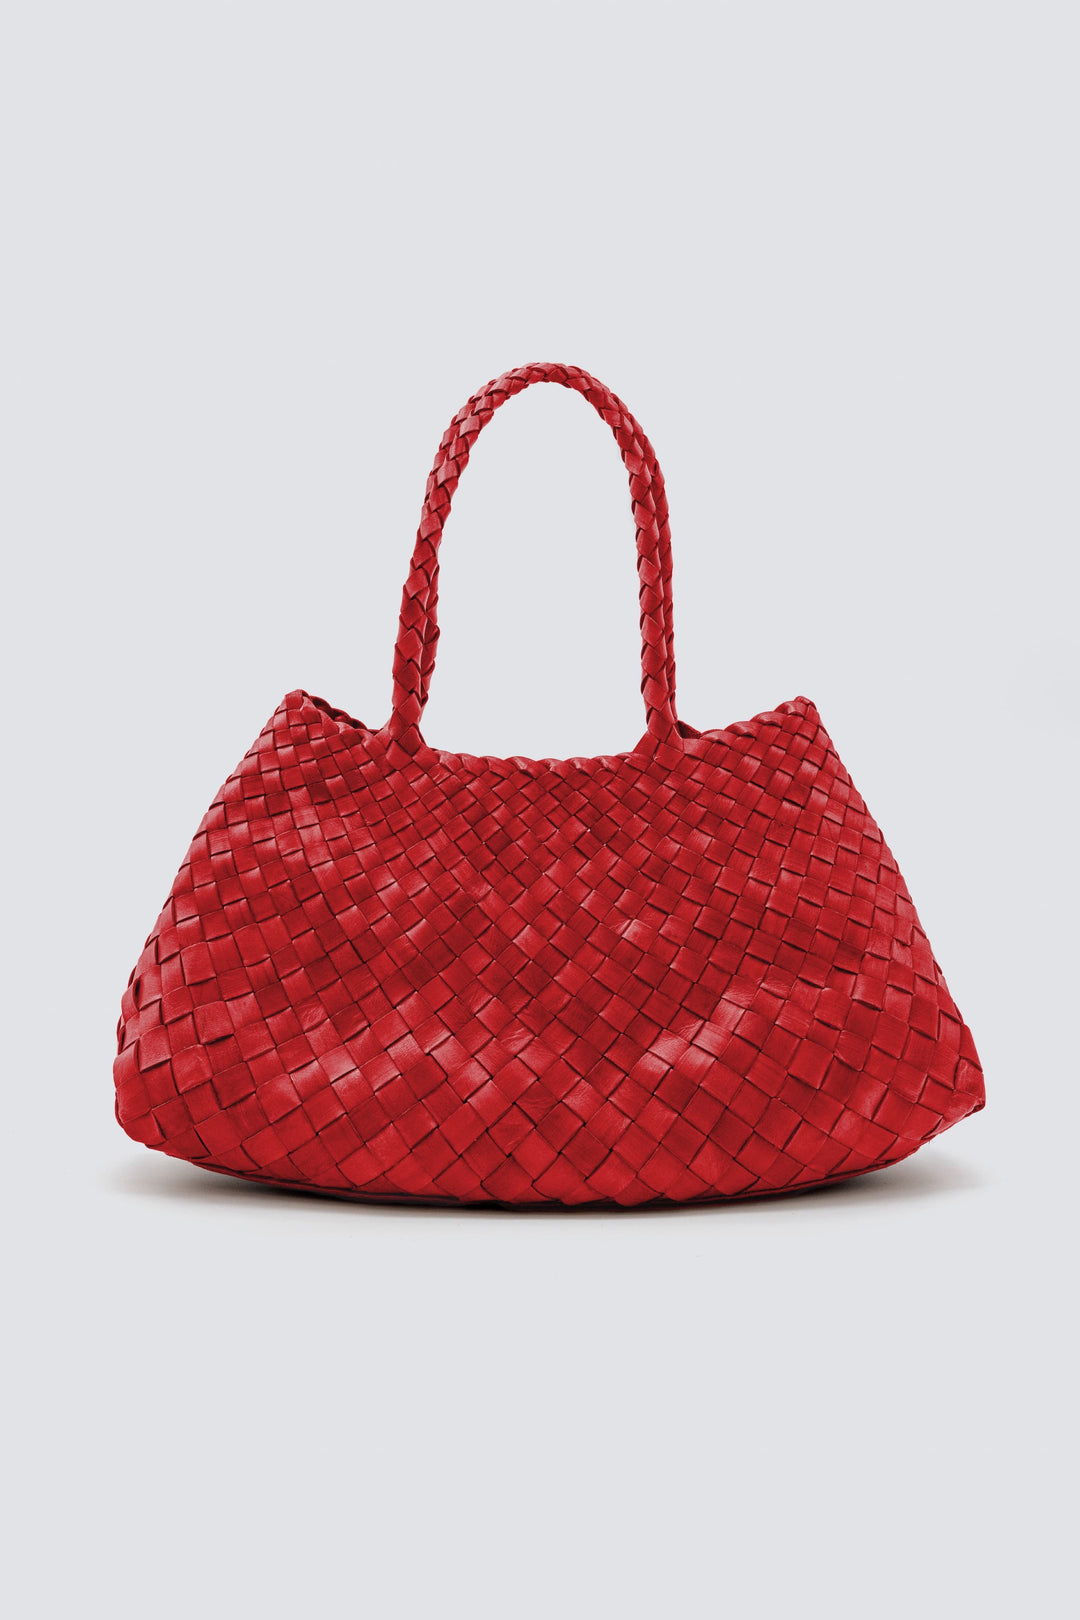 Woven Leather Bag